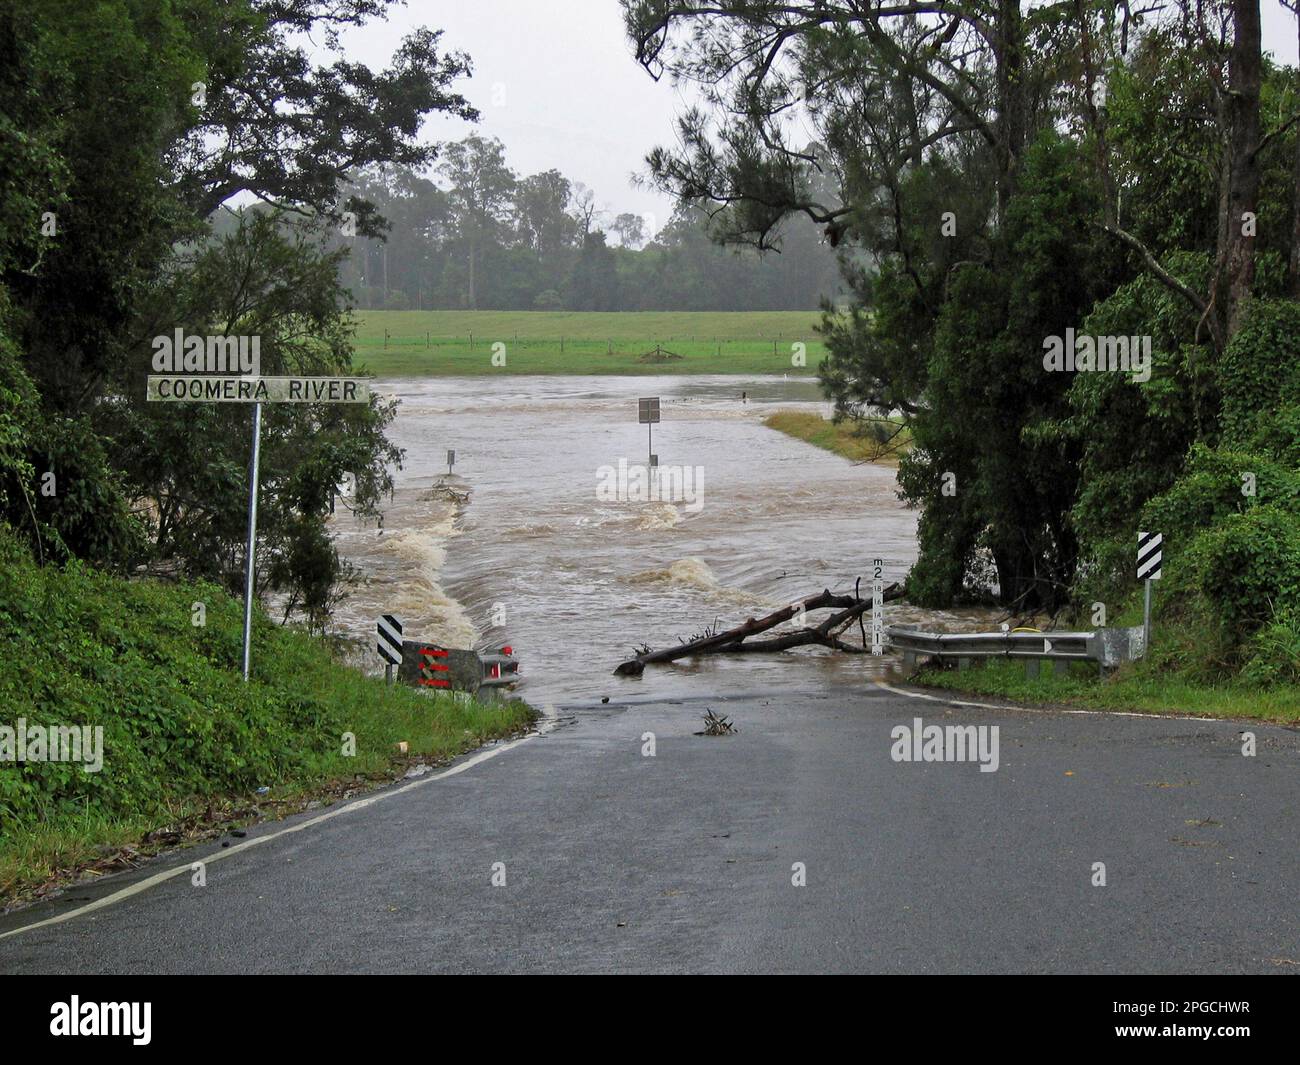 Old Birds Road disappearing under floodwaters of Coomera River, Queensland, Australia, in 2005. Road later diverted to avoid more flooding. Stock Photo